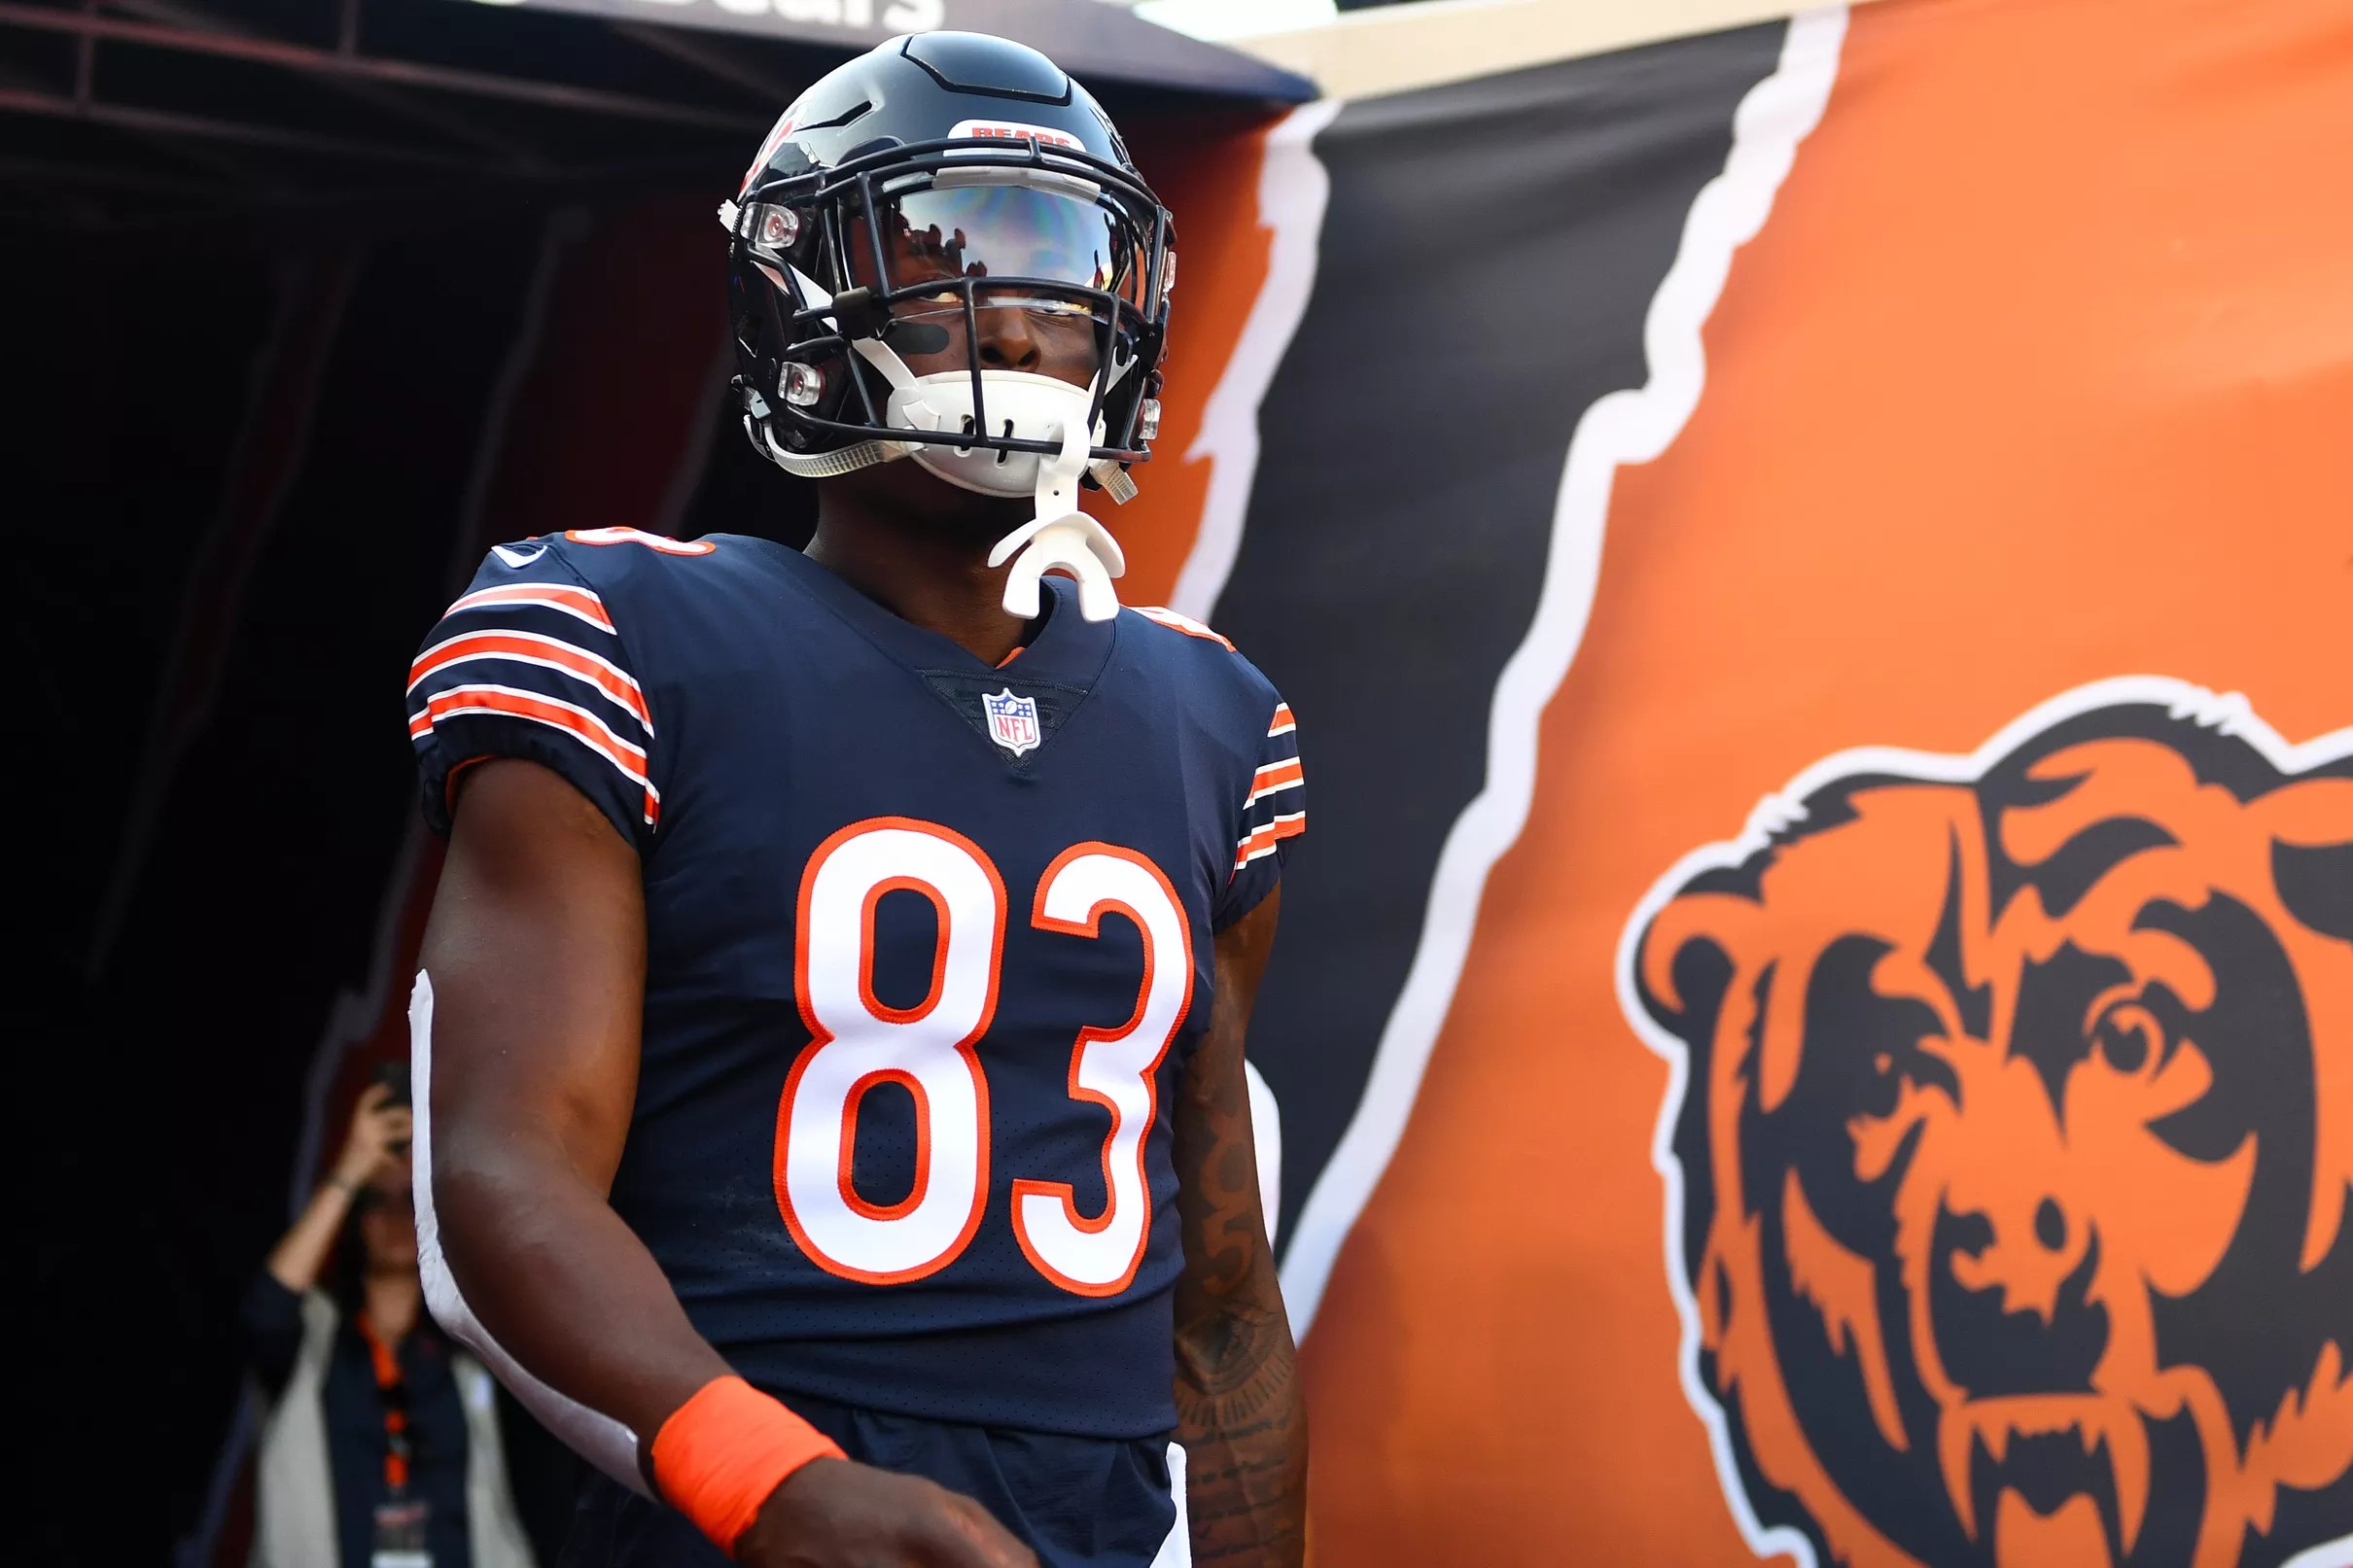 Too much of a good thing which Bears receivers will make the roster?